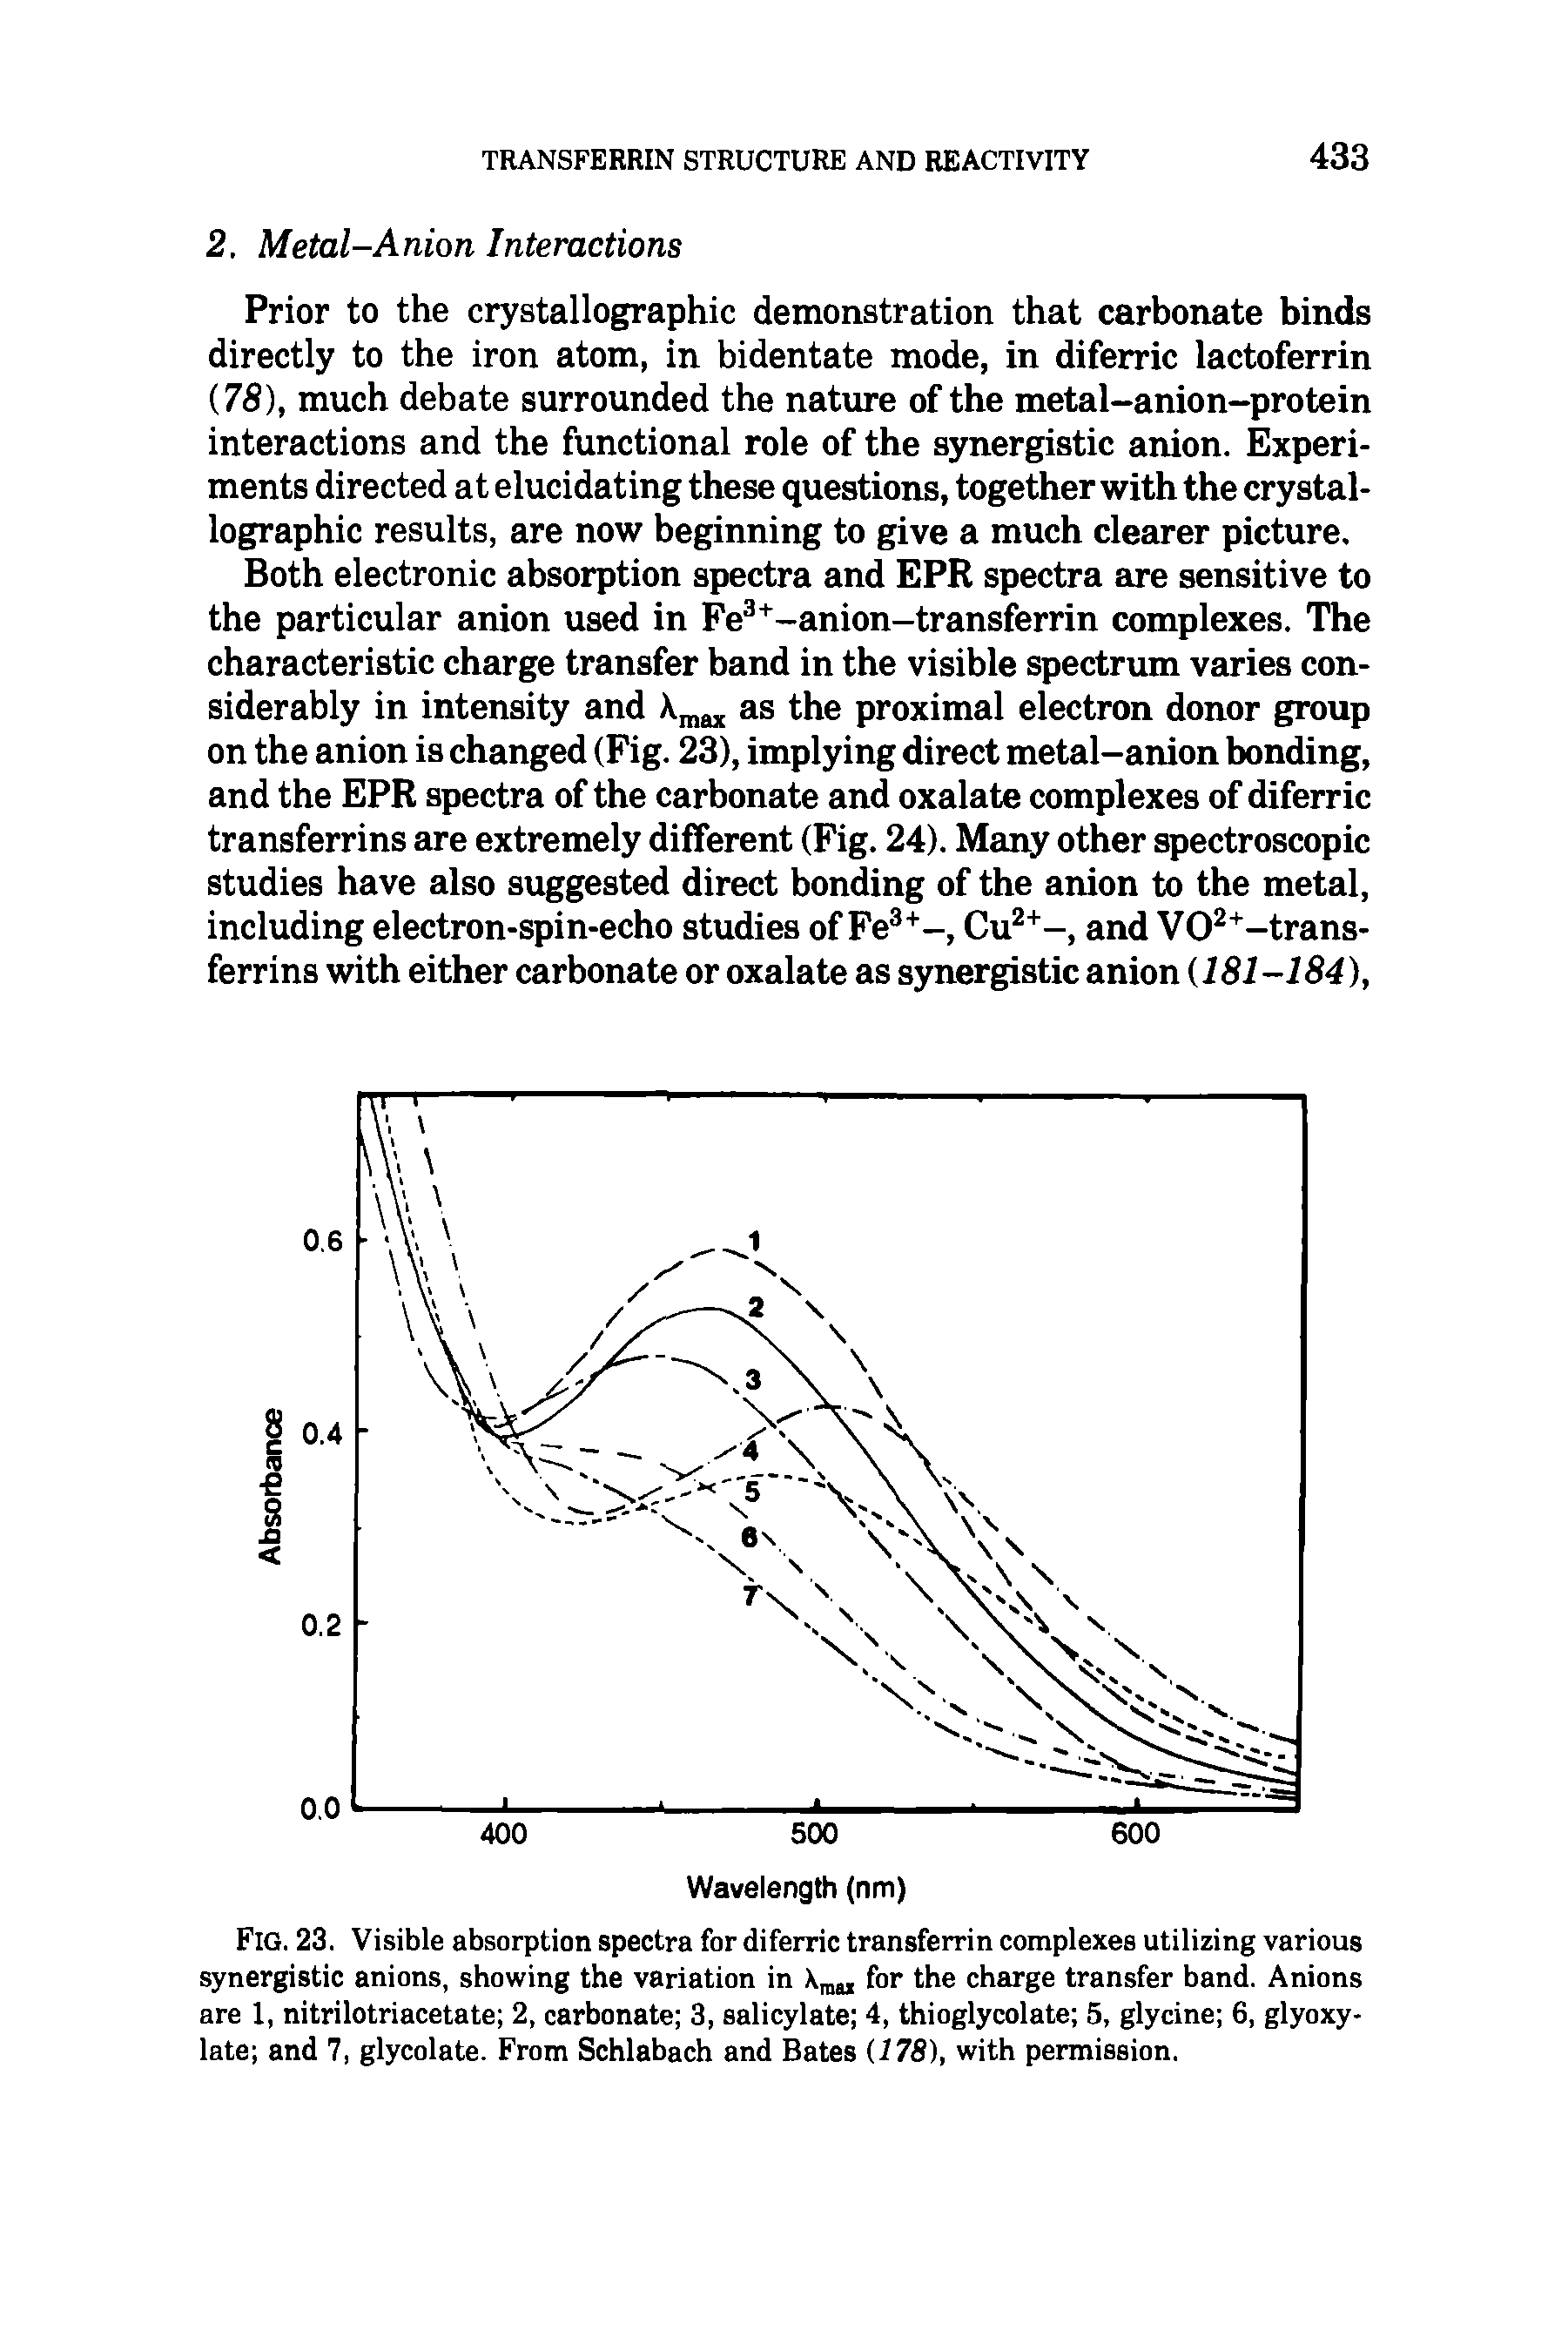 Fig. 23. Visible absorption spectra for diferric transferrin complexes utilizing various synergistic anions, showing the variation in mal for the charge transfer band. Anions are 1, nitrilotriacetate 2, carbonate 3, salicylate 4, thioglycolate 5, glycine 6, glyoxy-late and 7, glycolate. From Schlabach and Bates (178), with permission.